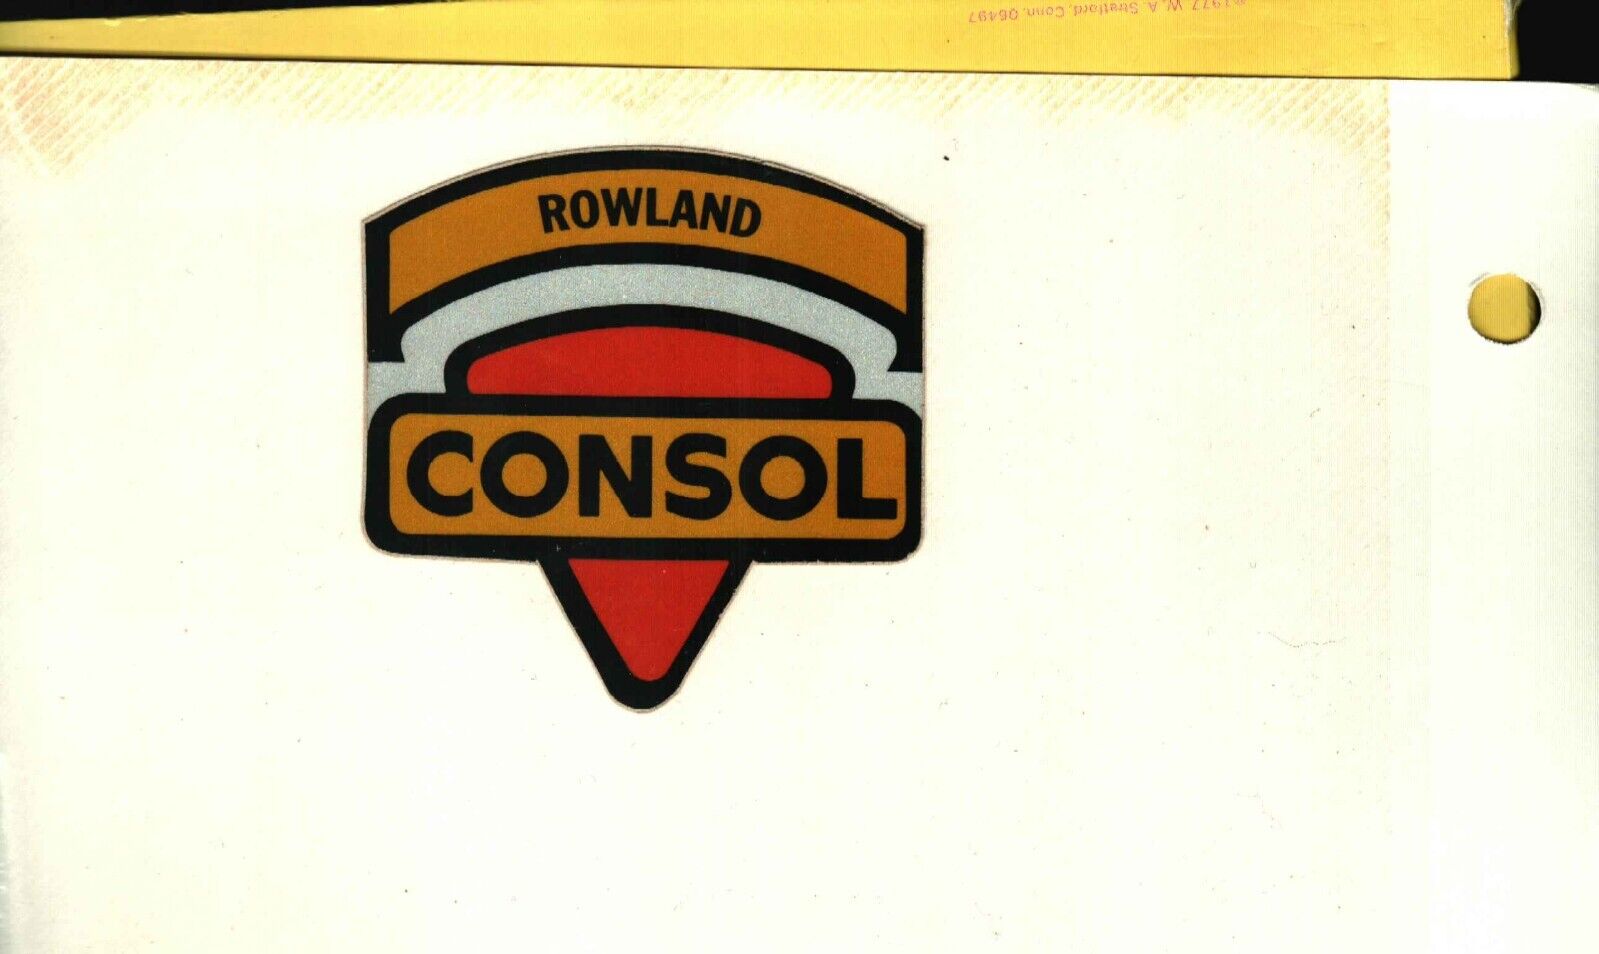 2ND PRINT SHIELD CONSOL ROWLAND BROWN BACK CONSOL COAL MINING STICKER # 1333